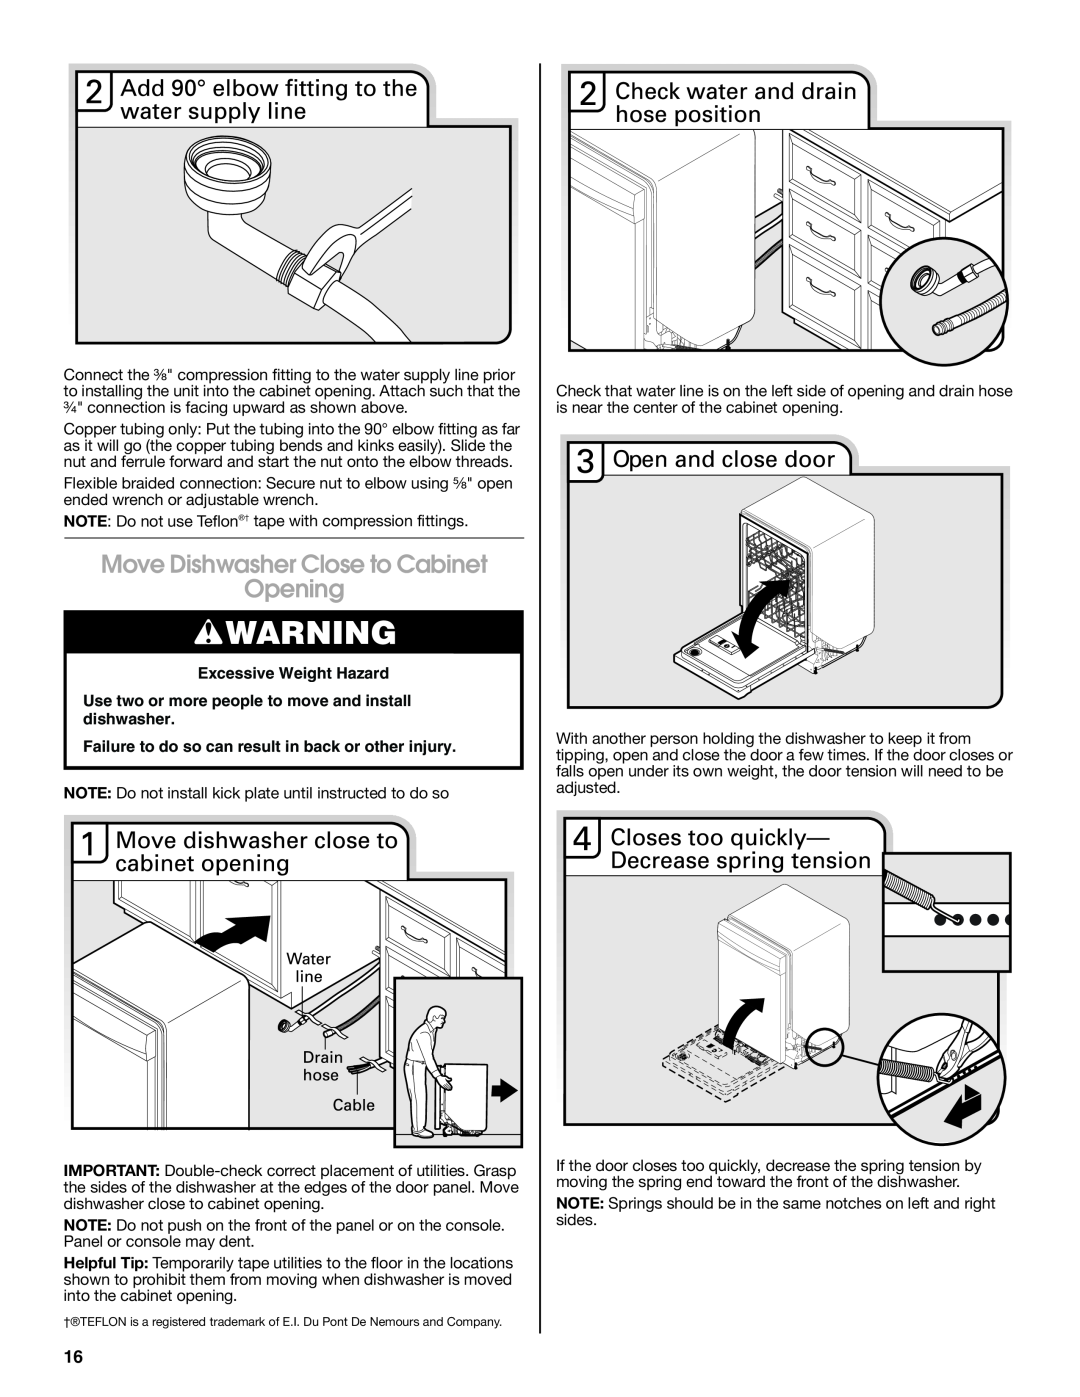 Whirlpool W10435039A installation instructions Move Dishwasher Close to Cabinet Opening, Excessive Weight Hazard 